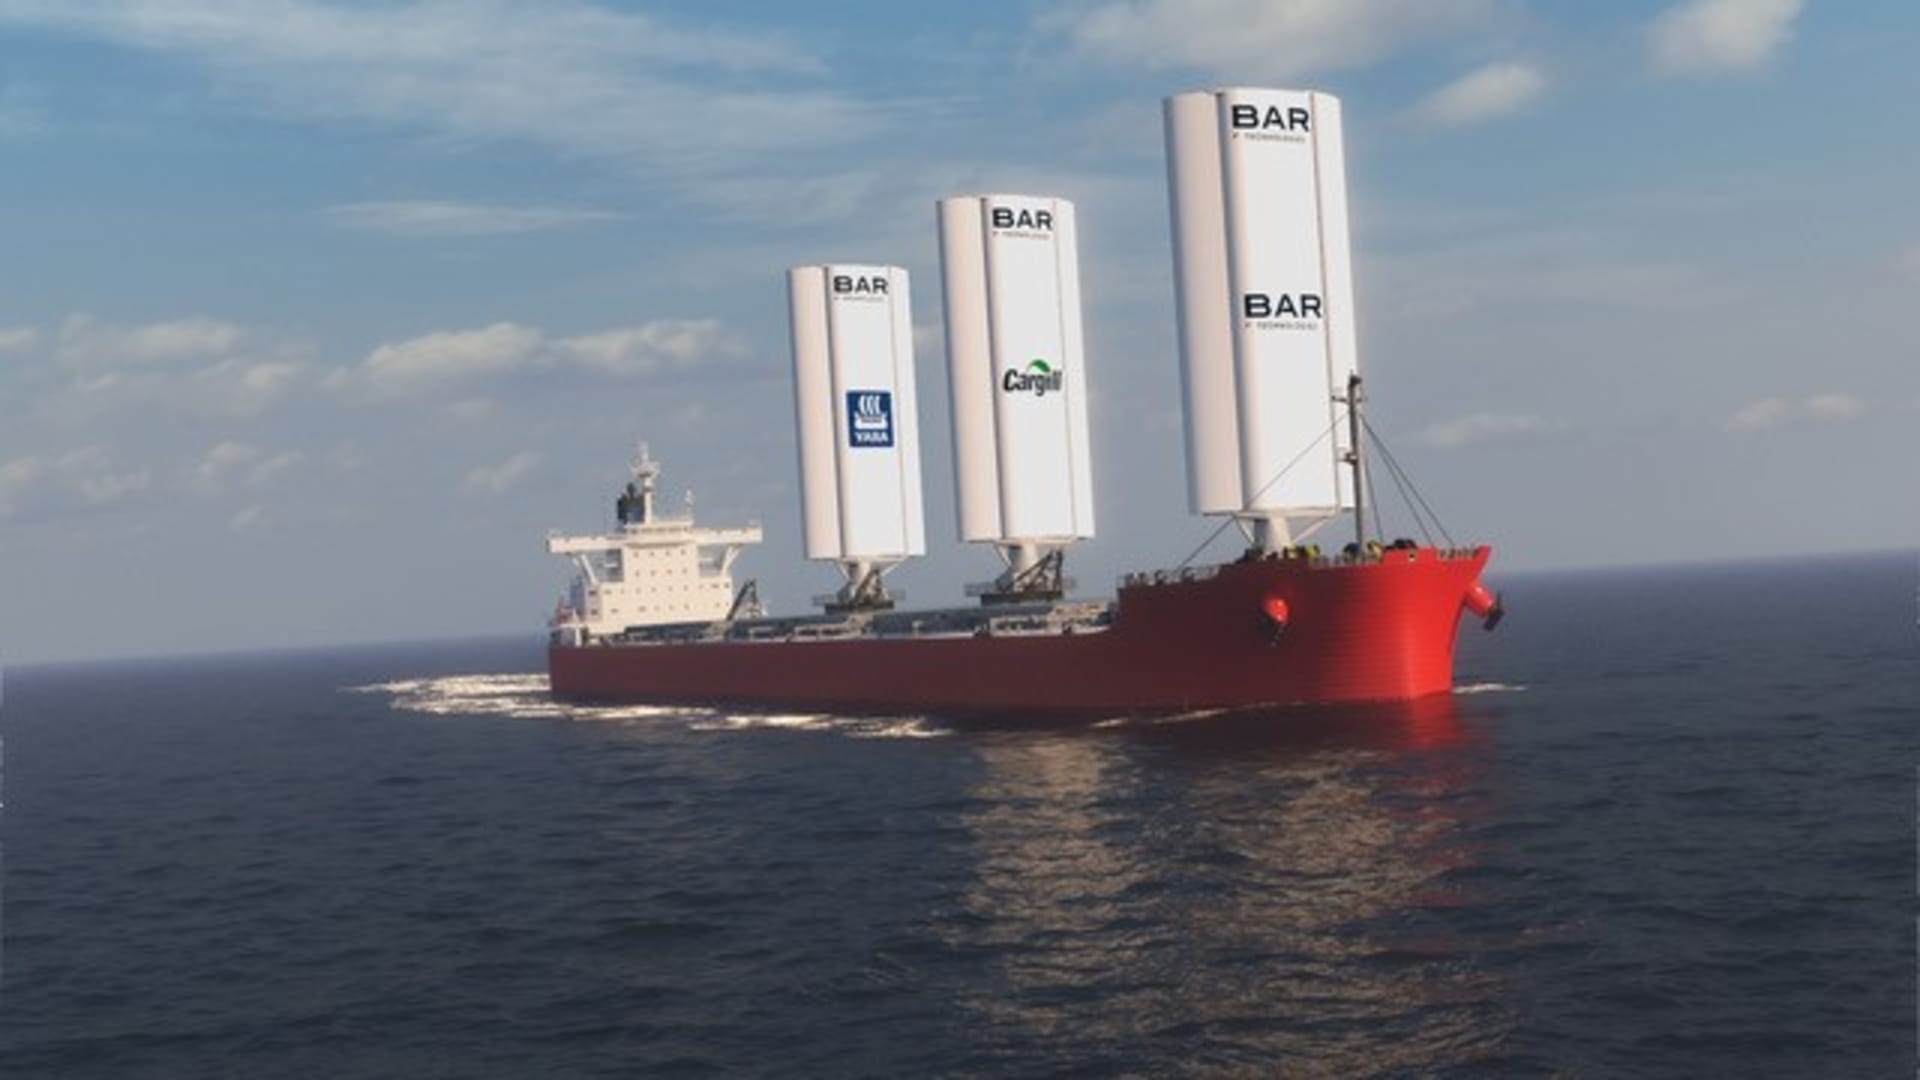 A ship outfitted with WindWings, solid sails designed by BAR Technologies. Cargill reportedly has plans to charter at least 20 ships using the technology in coming years.